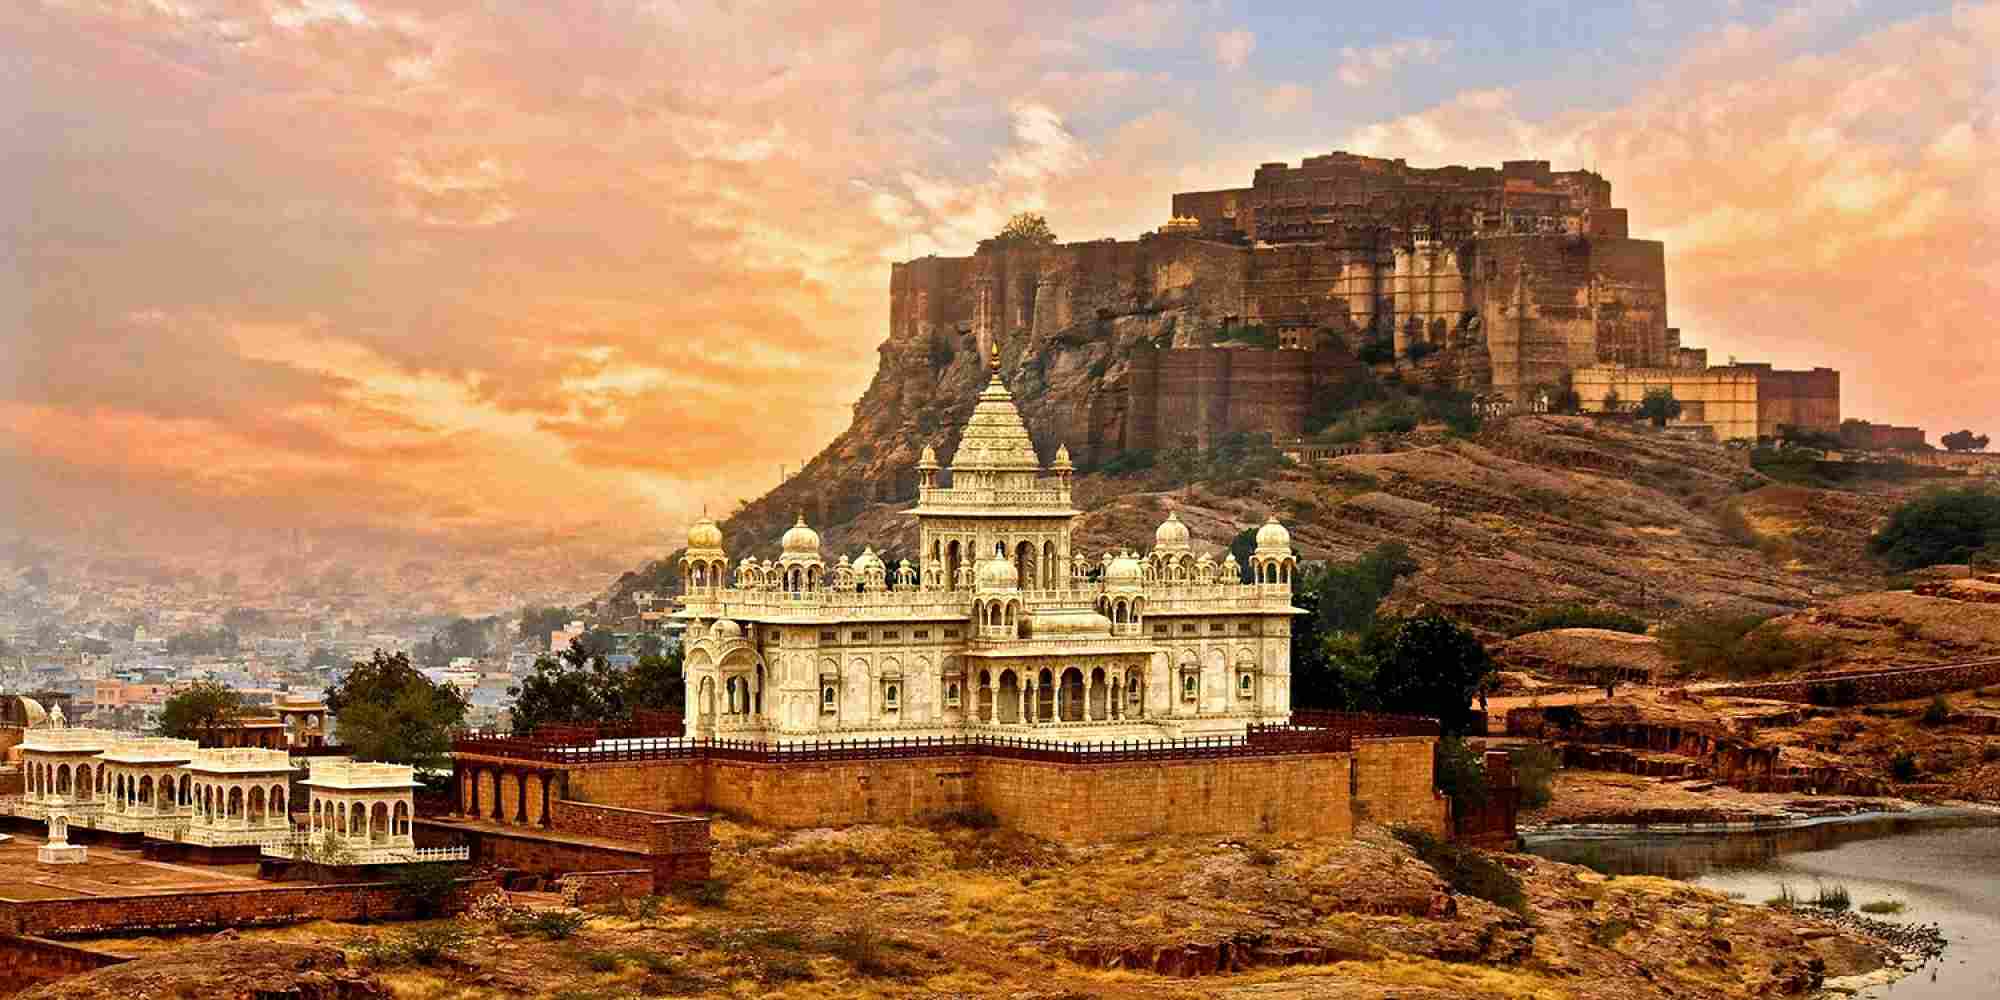 Jodhpur, the heritage city of Rajasthan : Travel Guide! - The Indian Wire